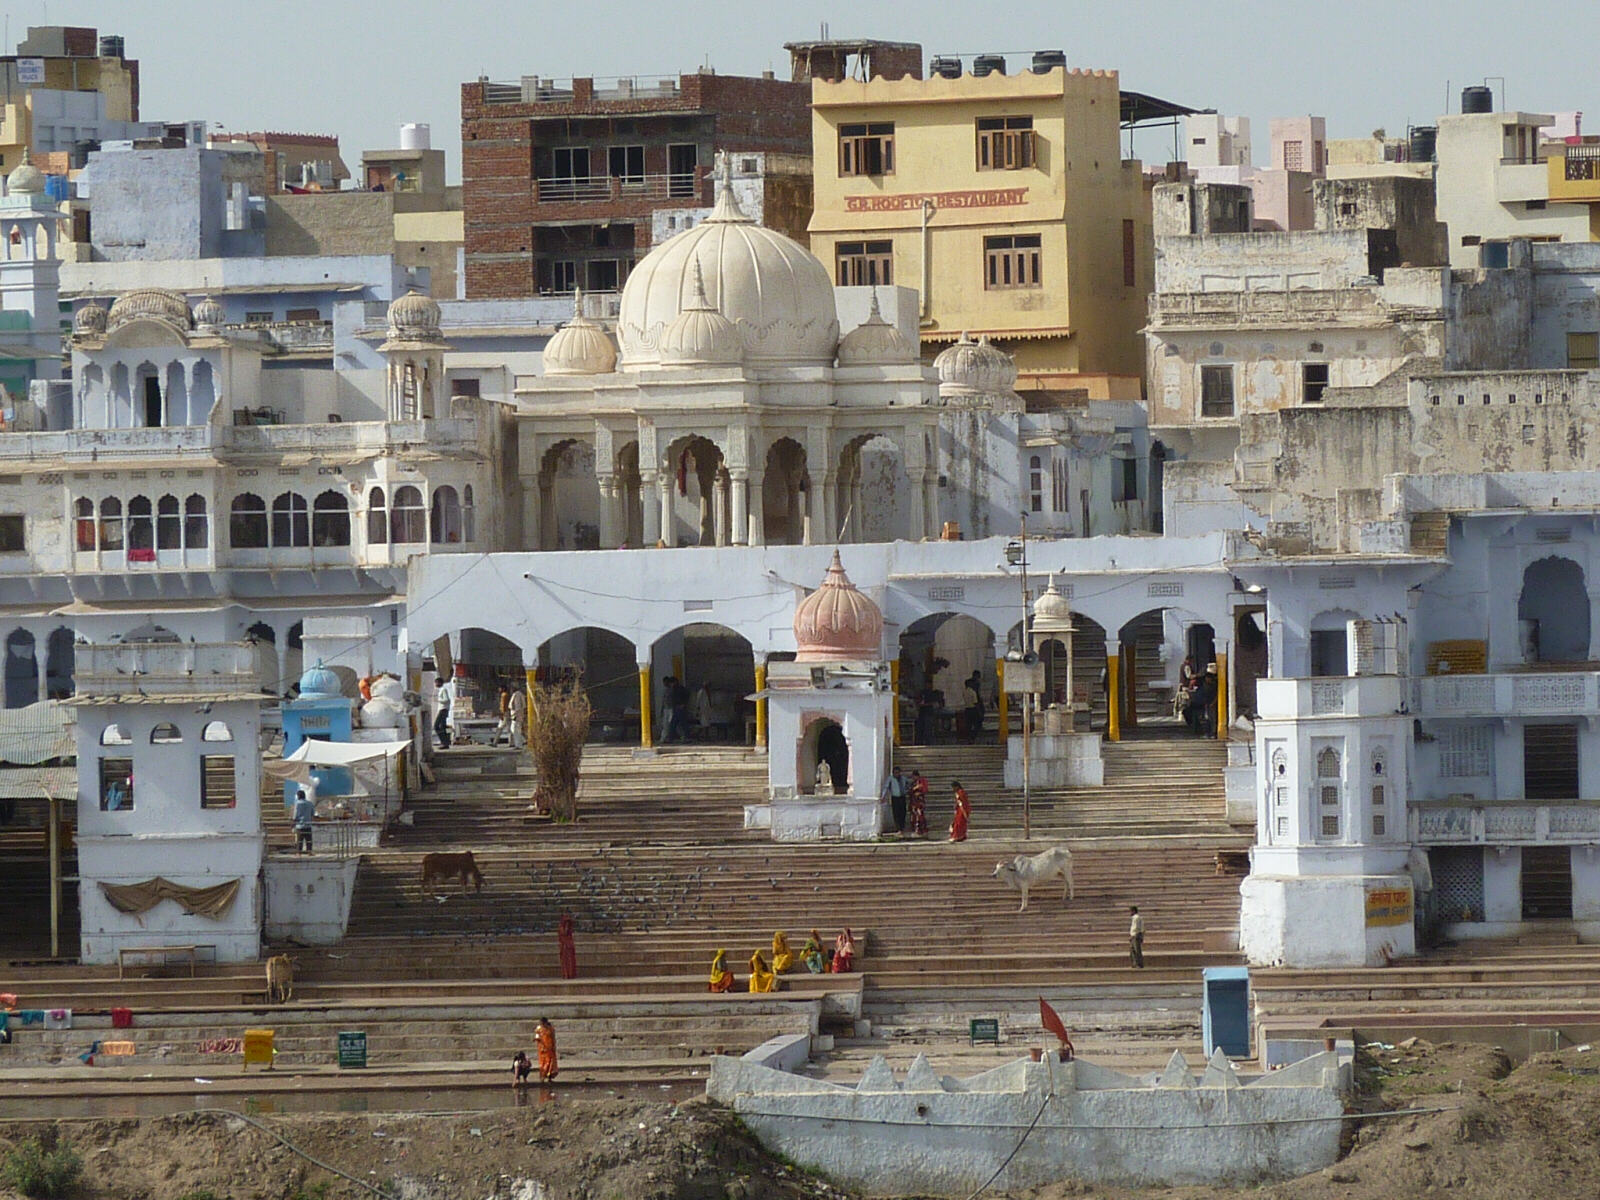 One of the bathing ghats on the lake at Pushkar, Rajasthan